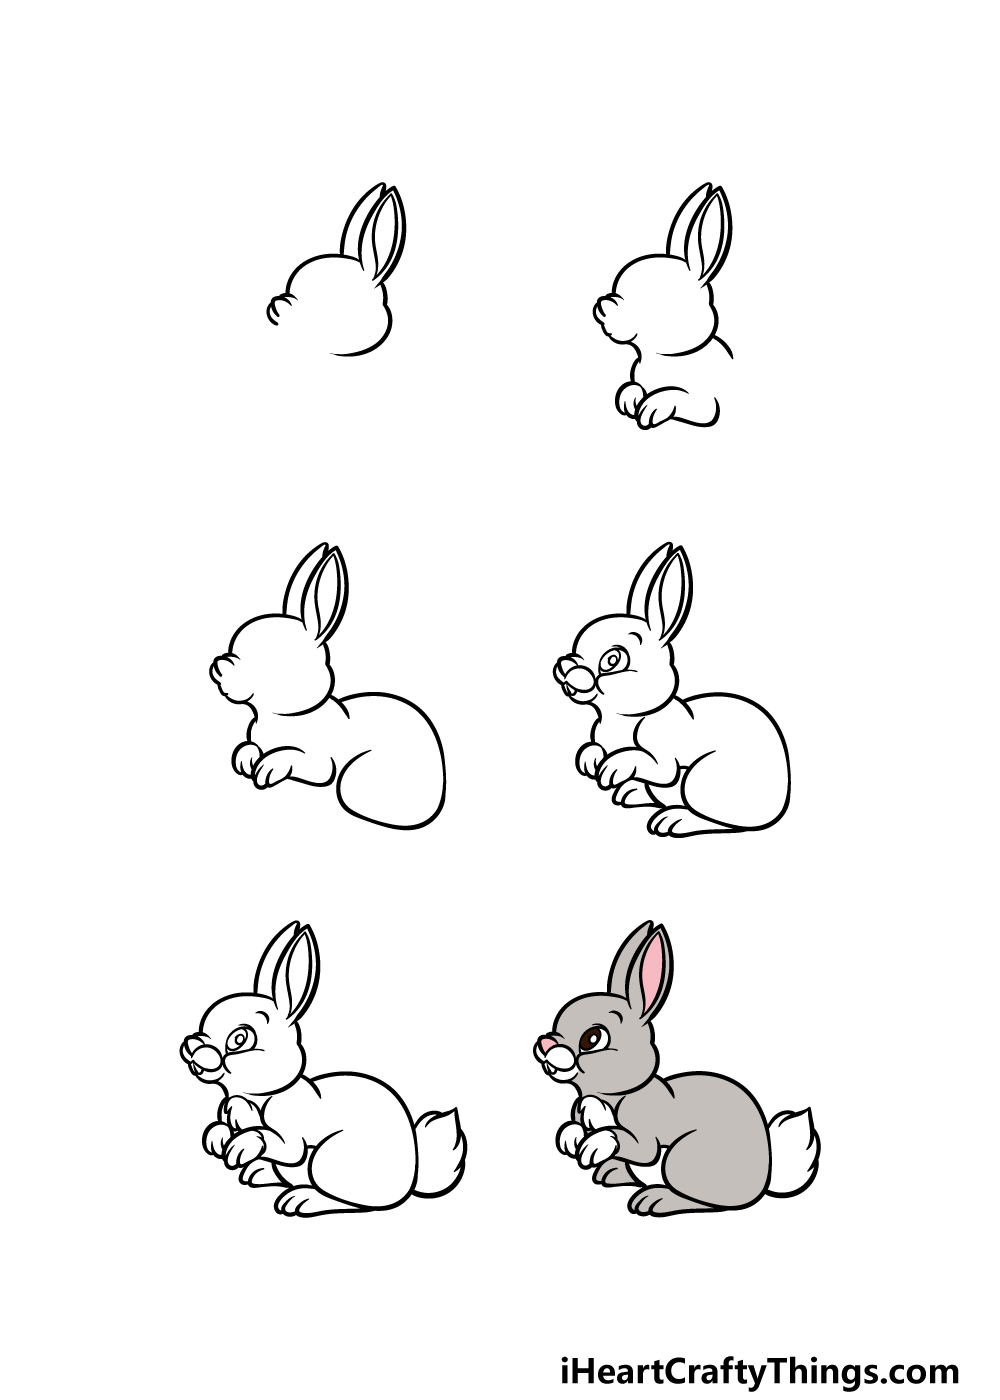 how to draw a cartoon rabbit in 6 steps